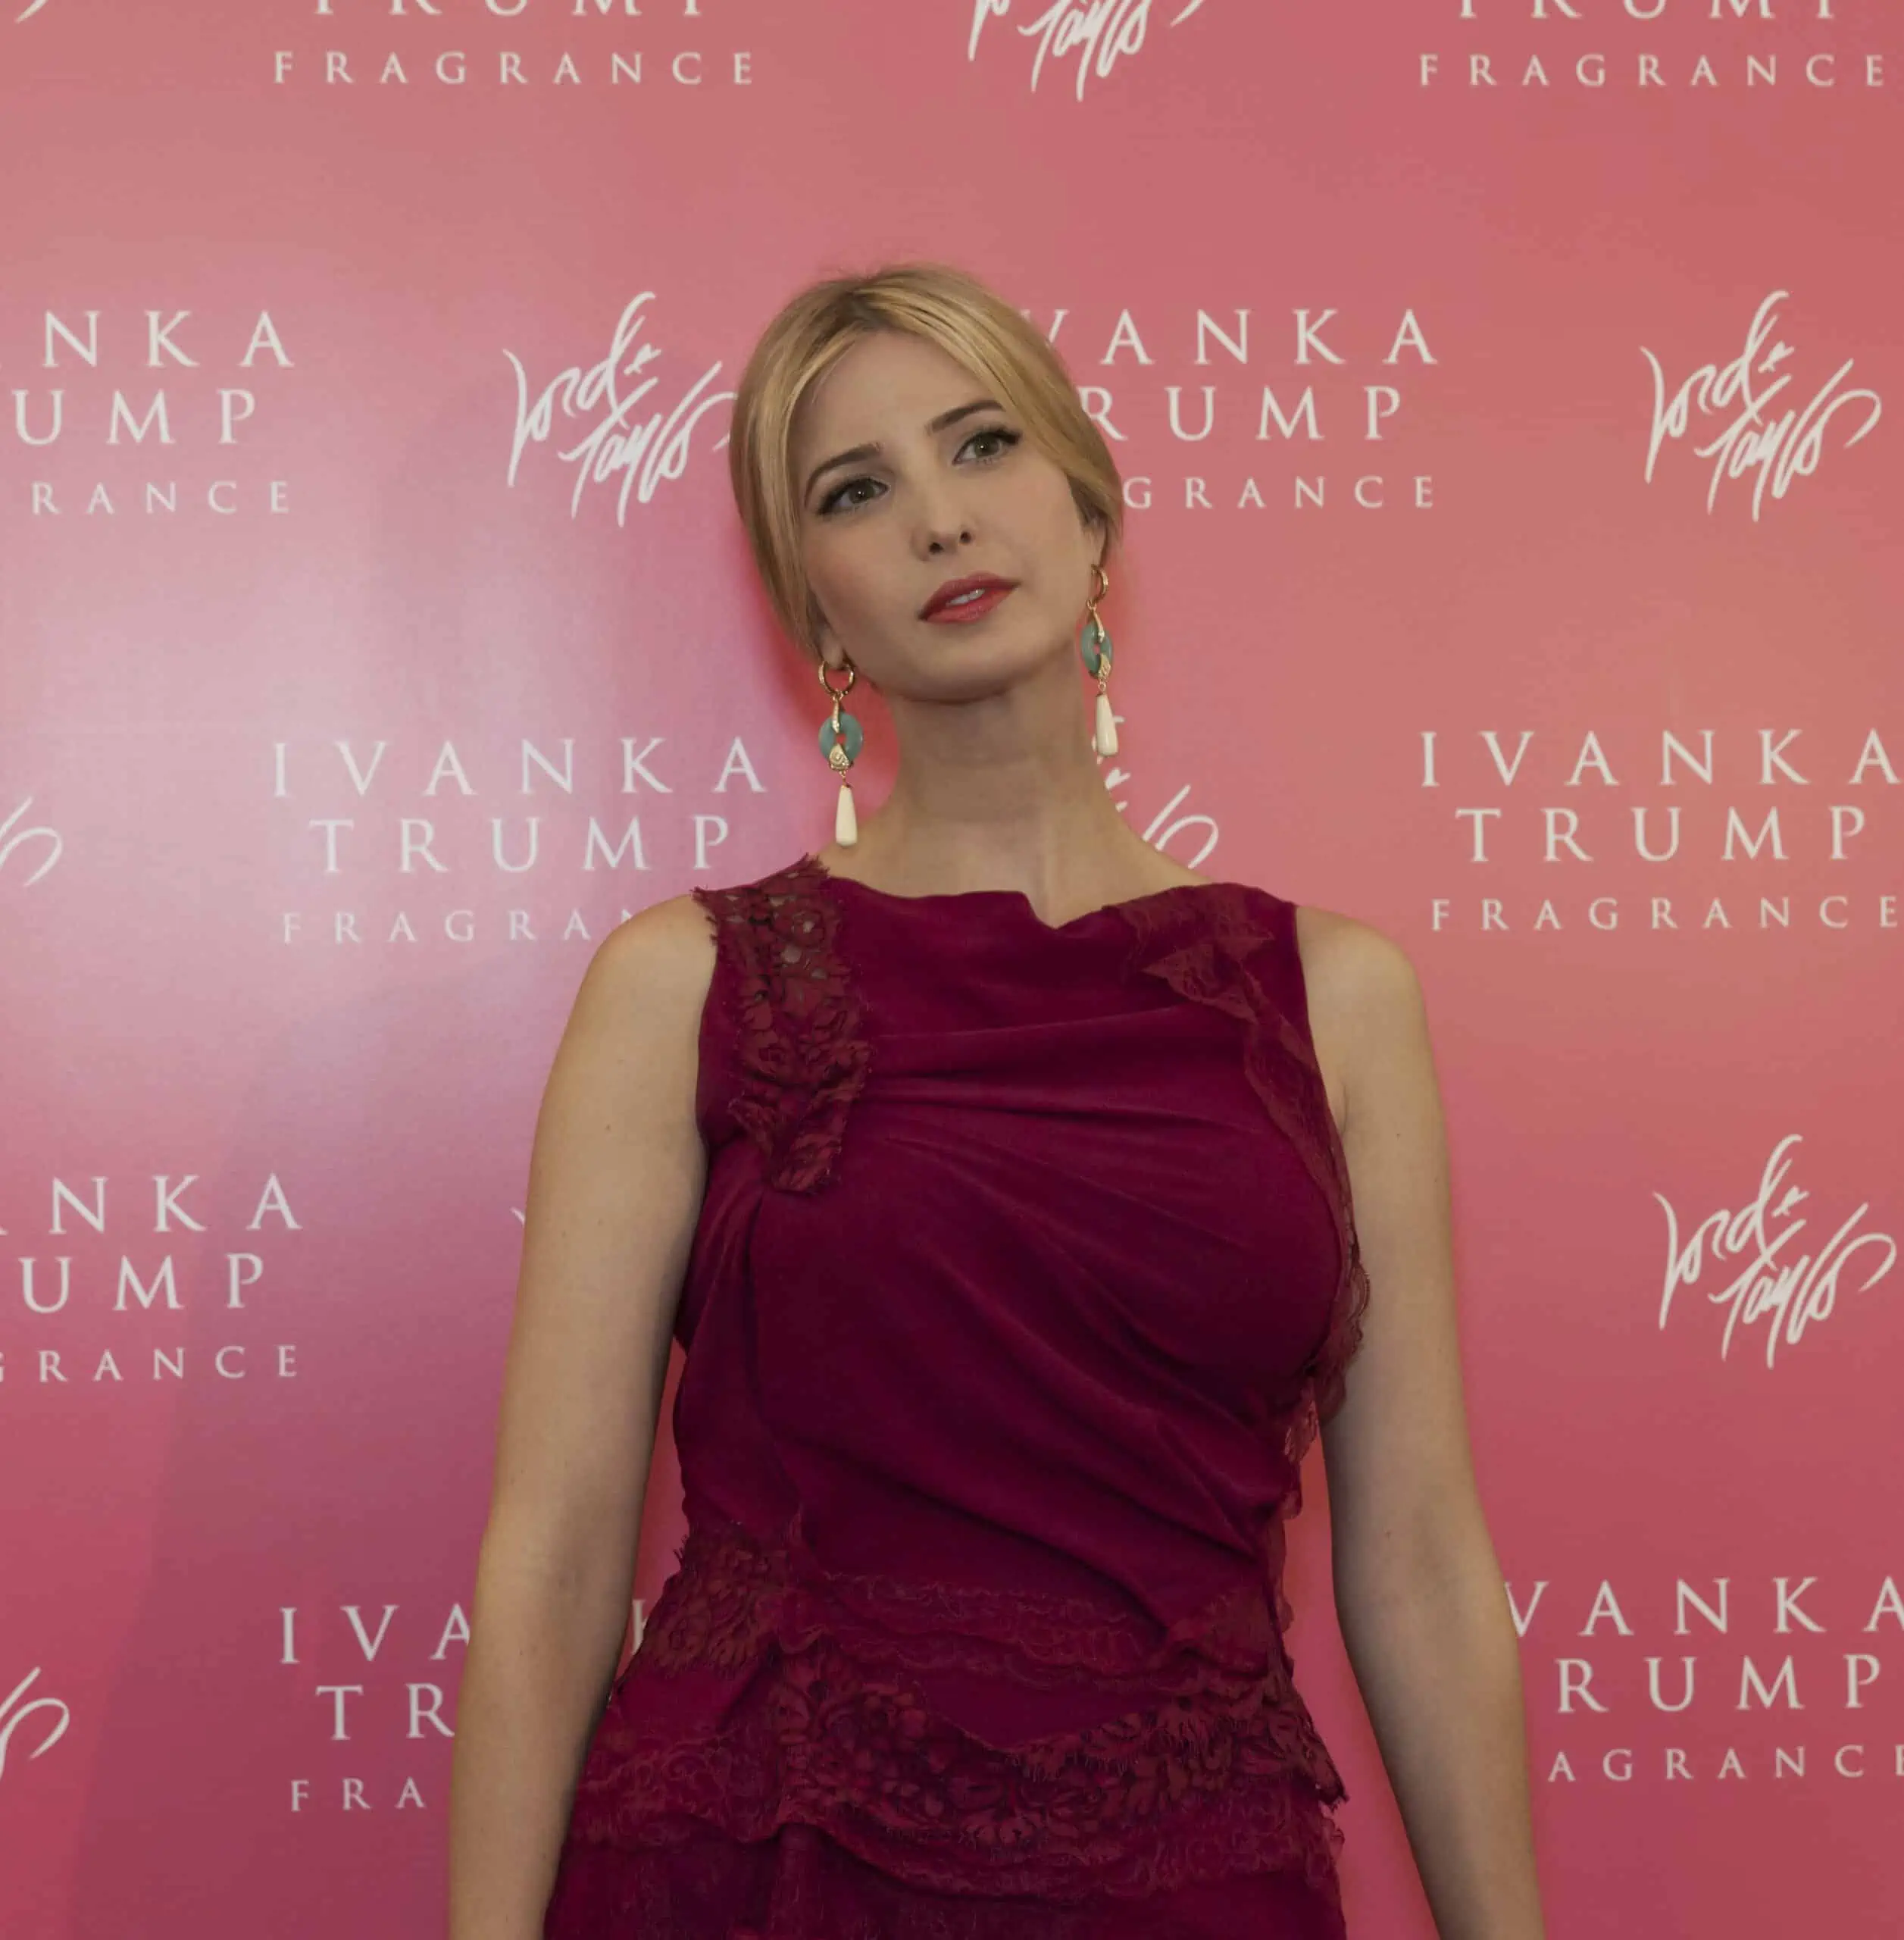 shutterstock 138004685 scaled e1689951701155 - Ivanka Trump’s Net Worth Is Astounding – But How She Earned It Is Even More Impressive